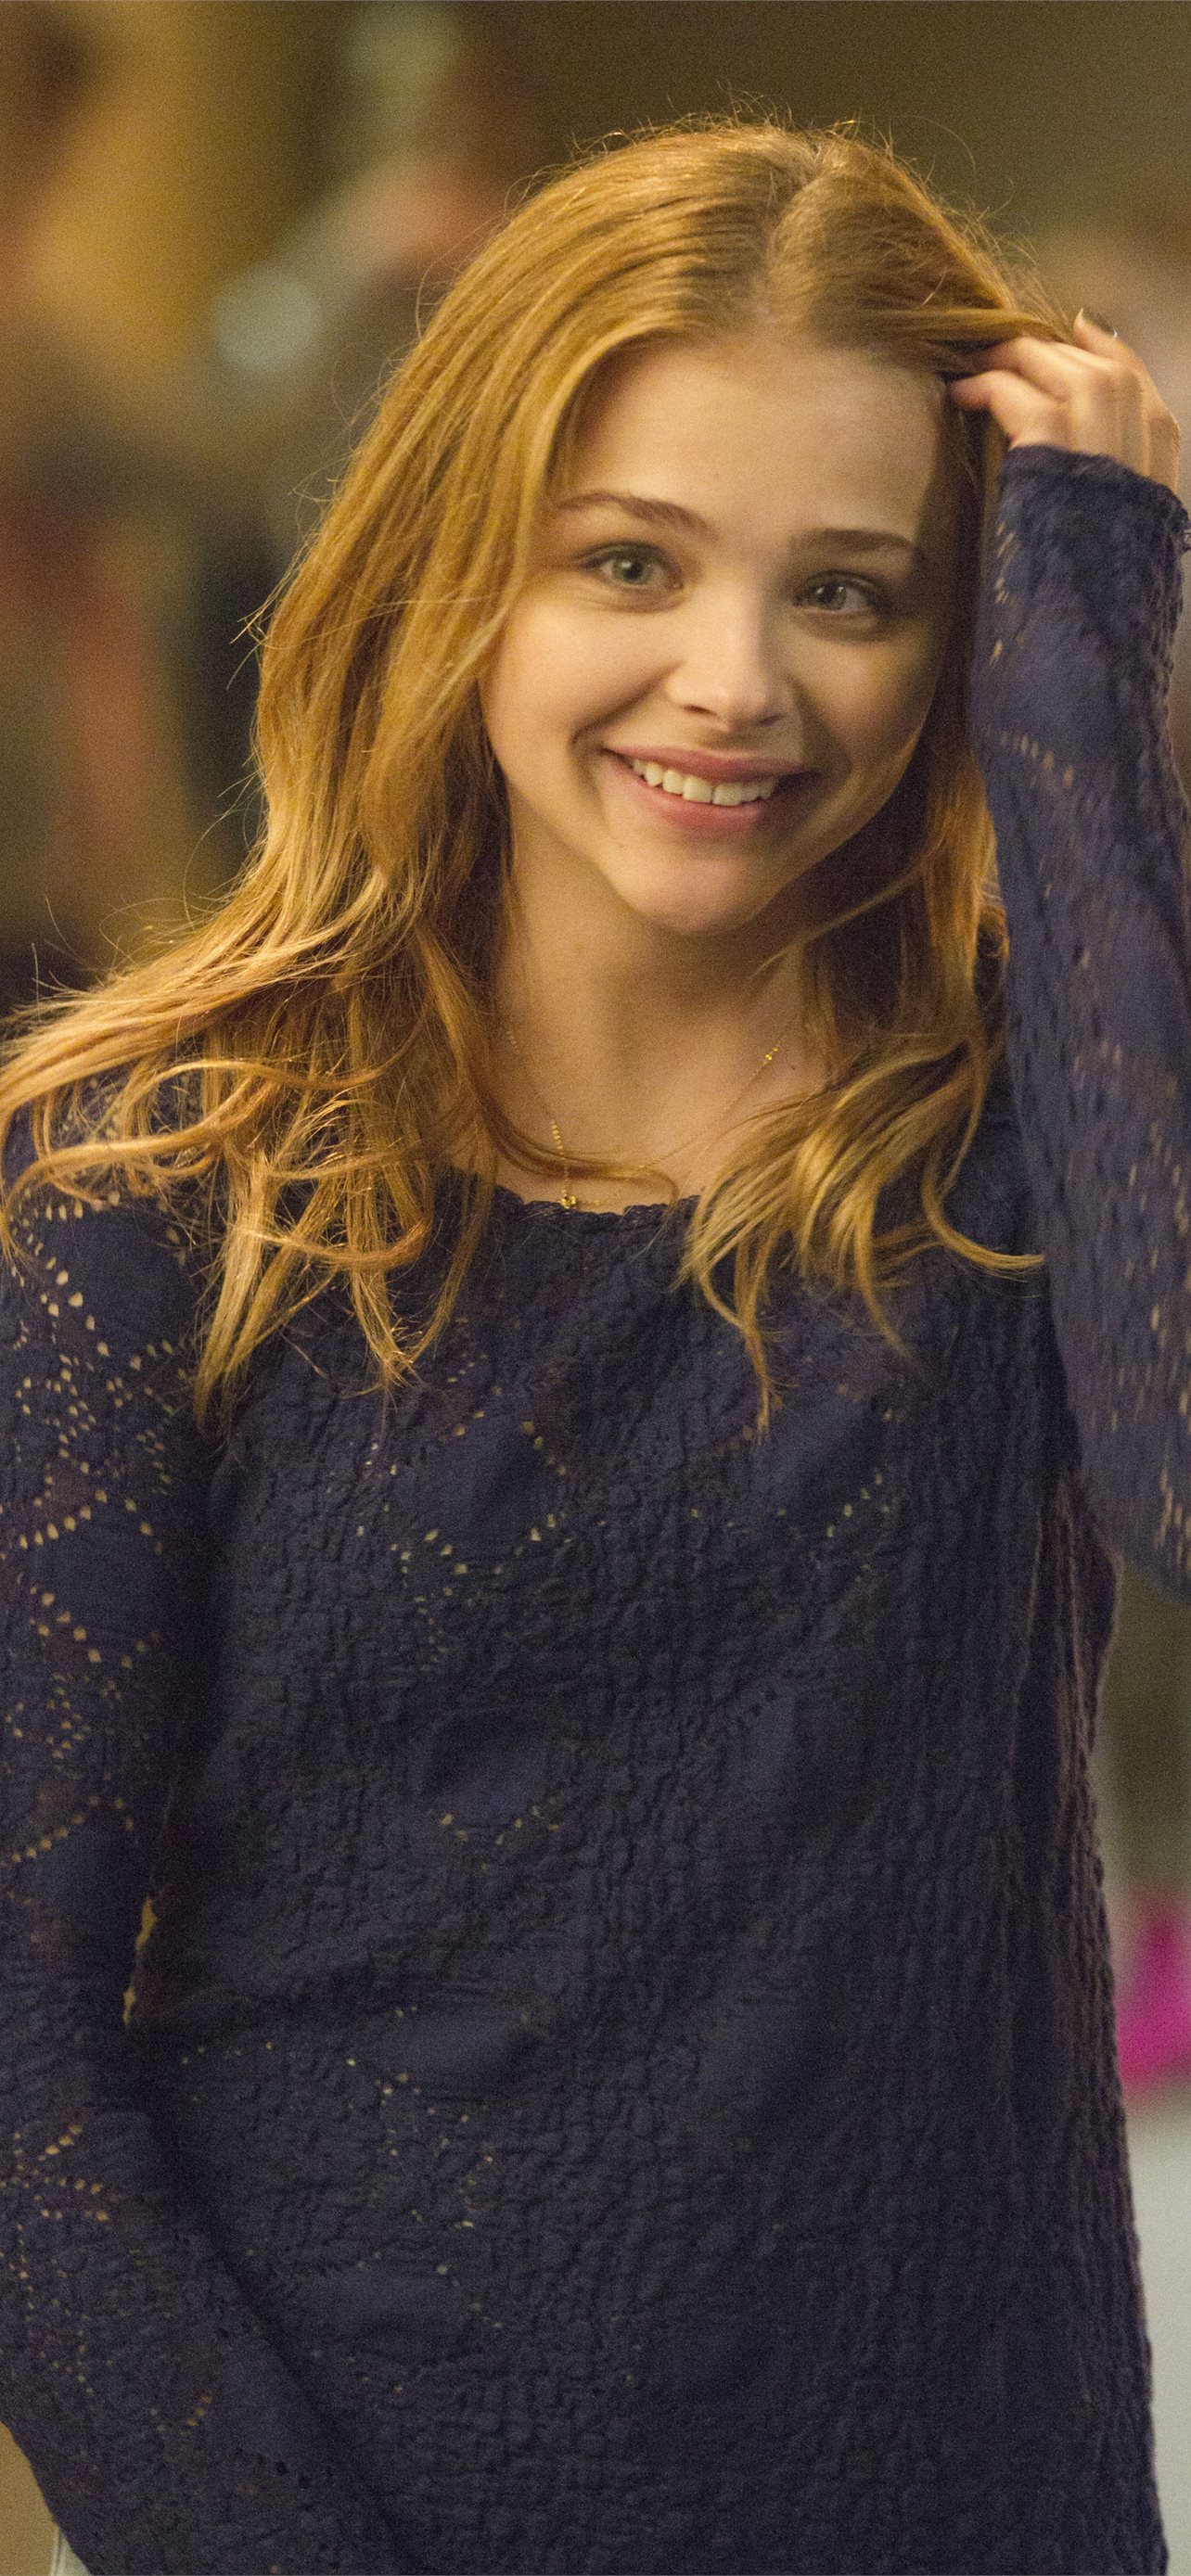 Chloe Grace Moretz Cute Smiling Samsung Galaxy Not... iPhone Wallpapers  Free Download